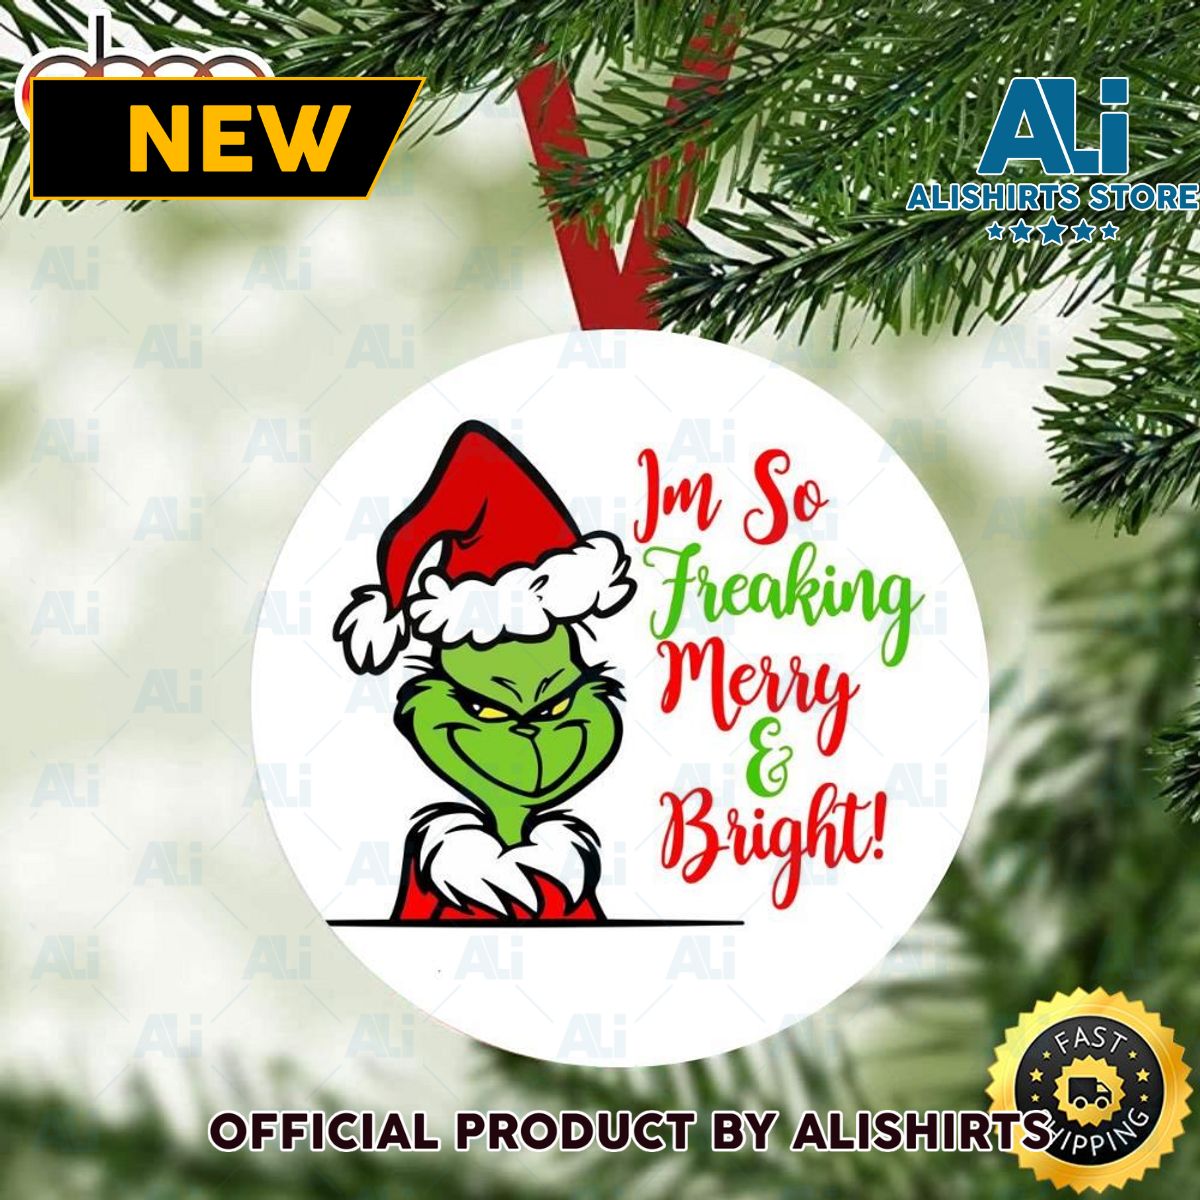 The Grinch I Am So Merry Bright Gift Grinch Ornament